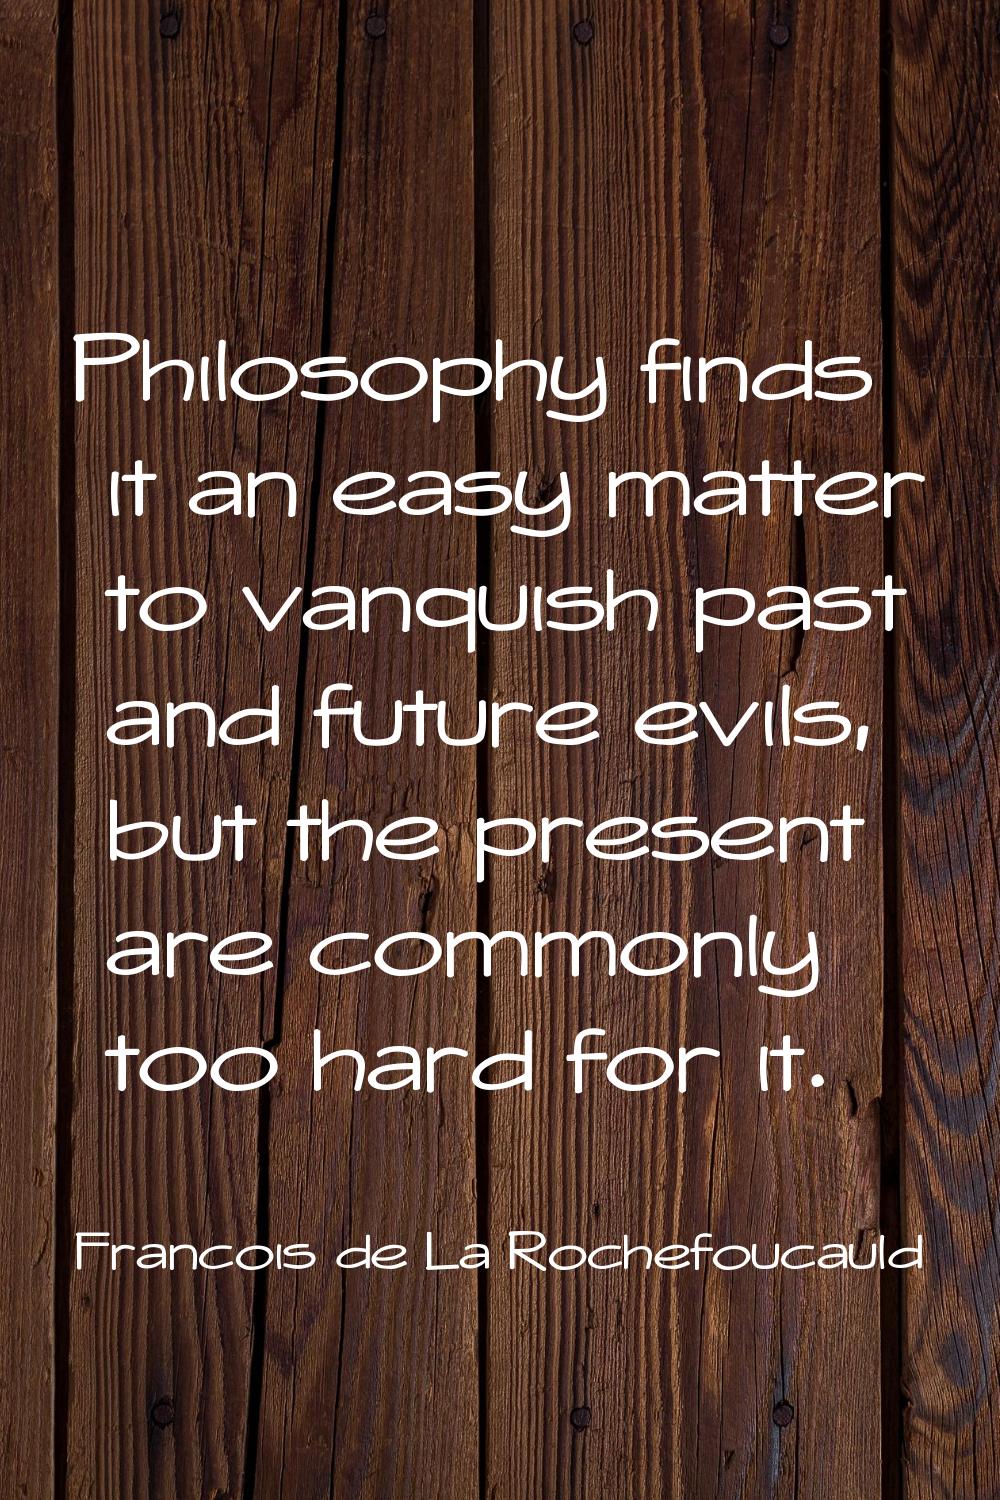 Philosophy finds it an easy matter to vanquish past and future evils, but the present are commonly 